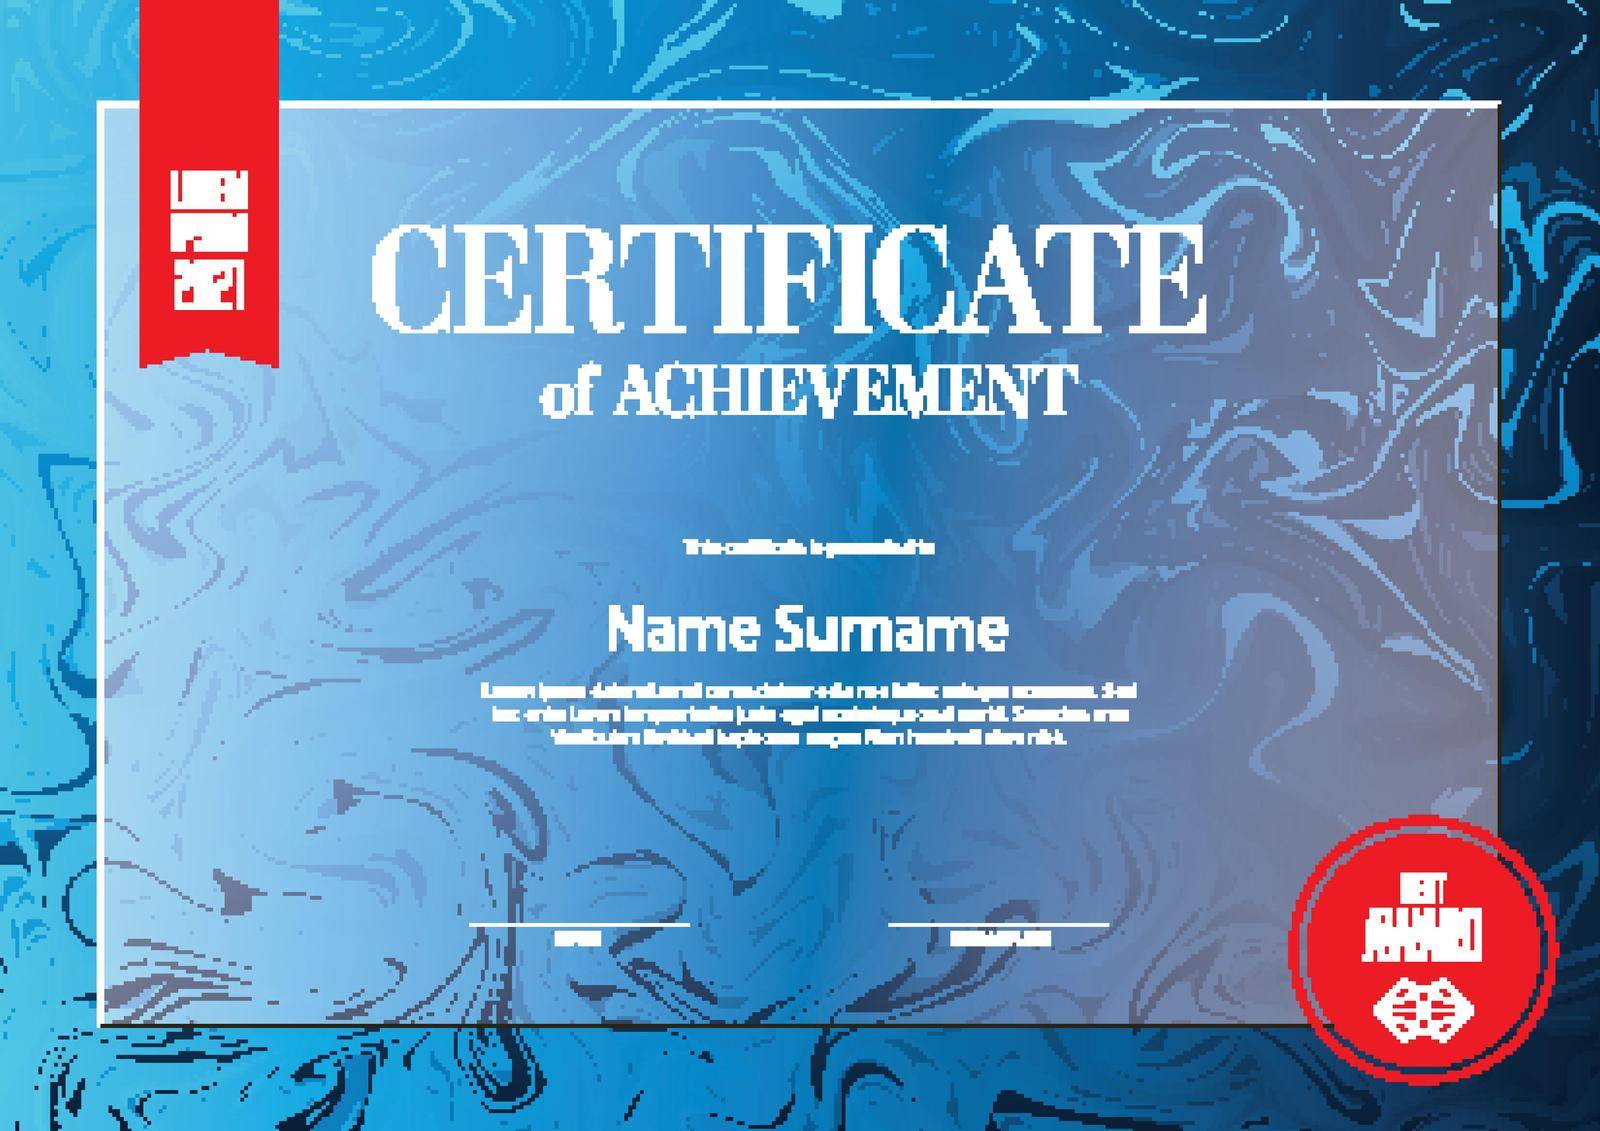 Modern art certificate of achievement template with place for your content - horizontal blue and red colors version